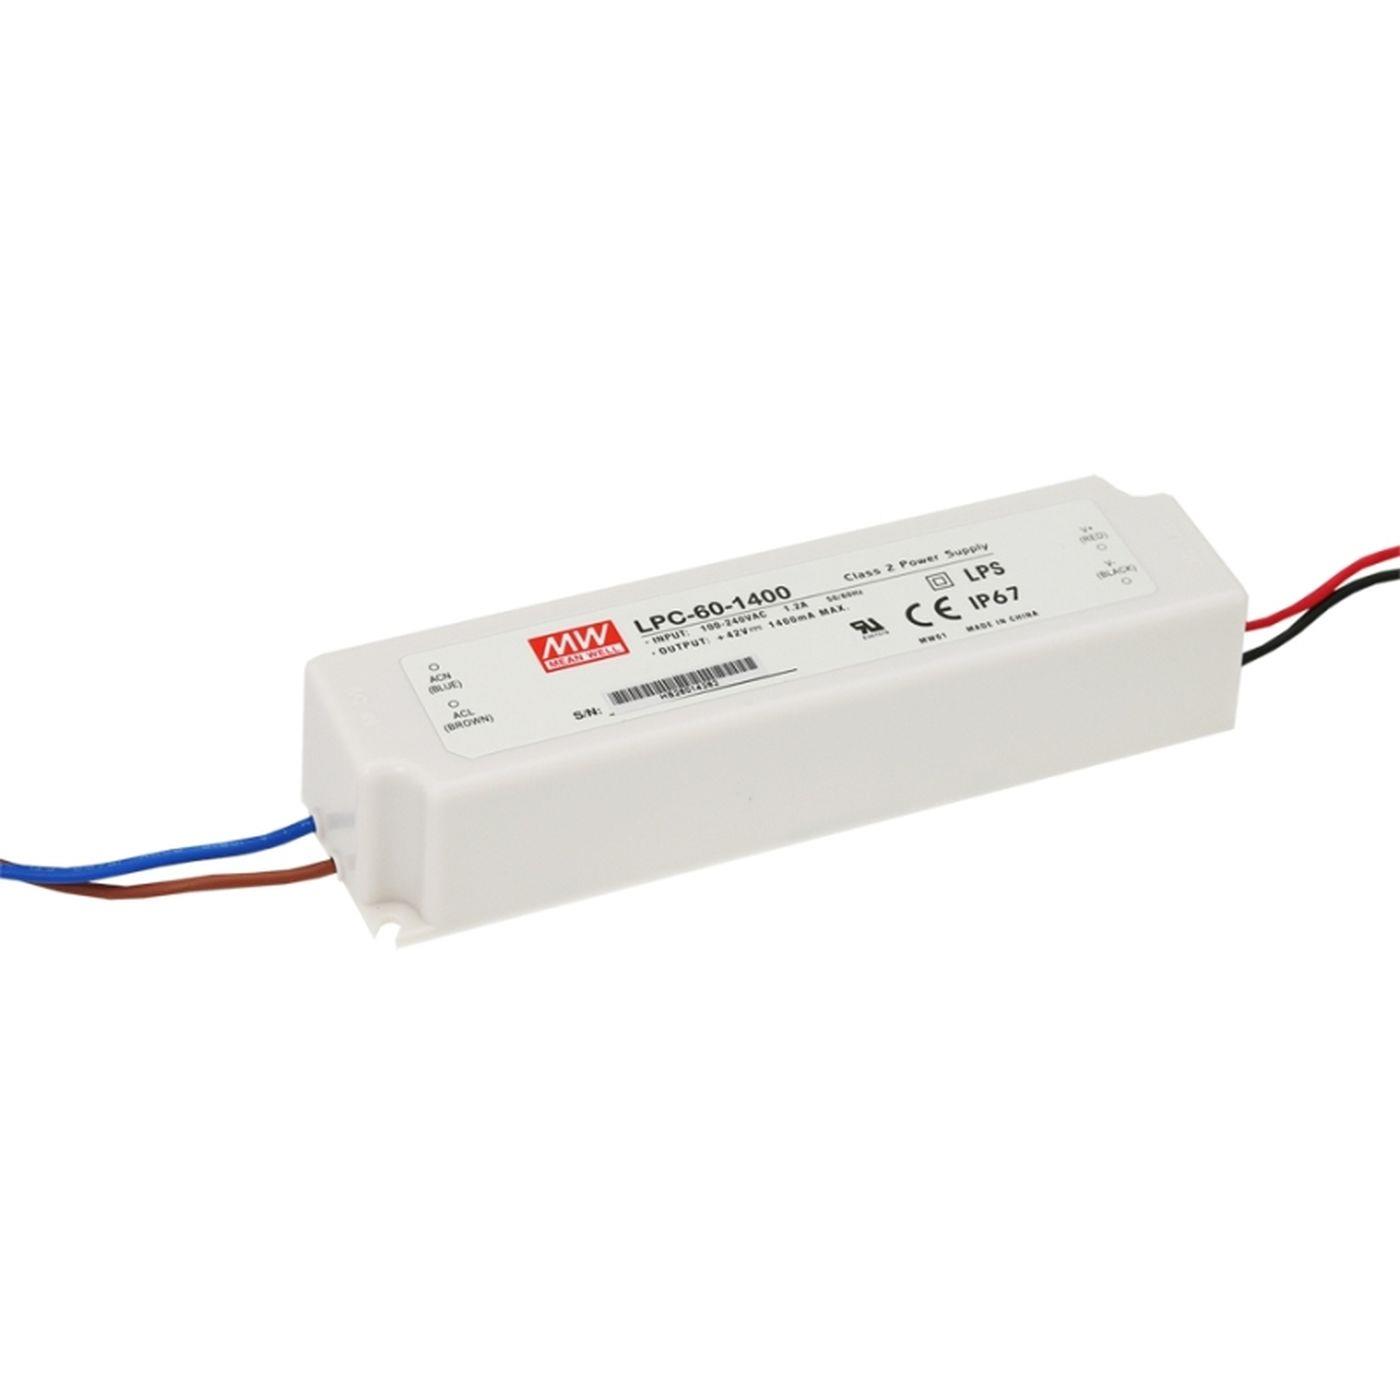 LPC-60-1050 50W 1050mA 9...48VDC Constant current LED power supply Driver Transformer IP67